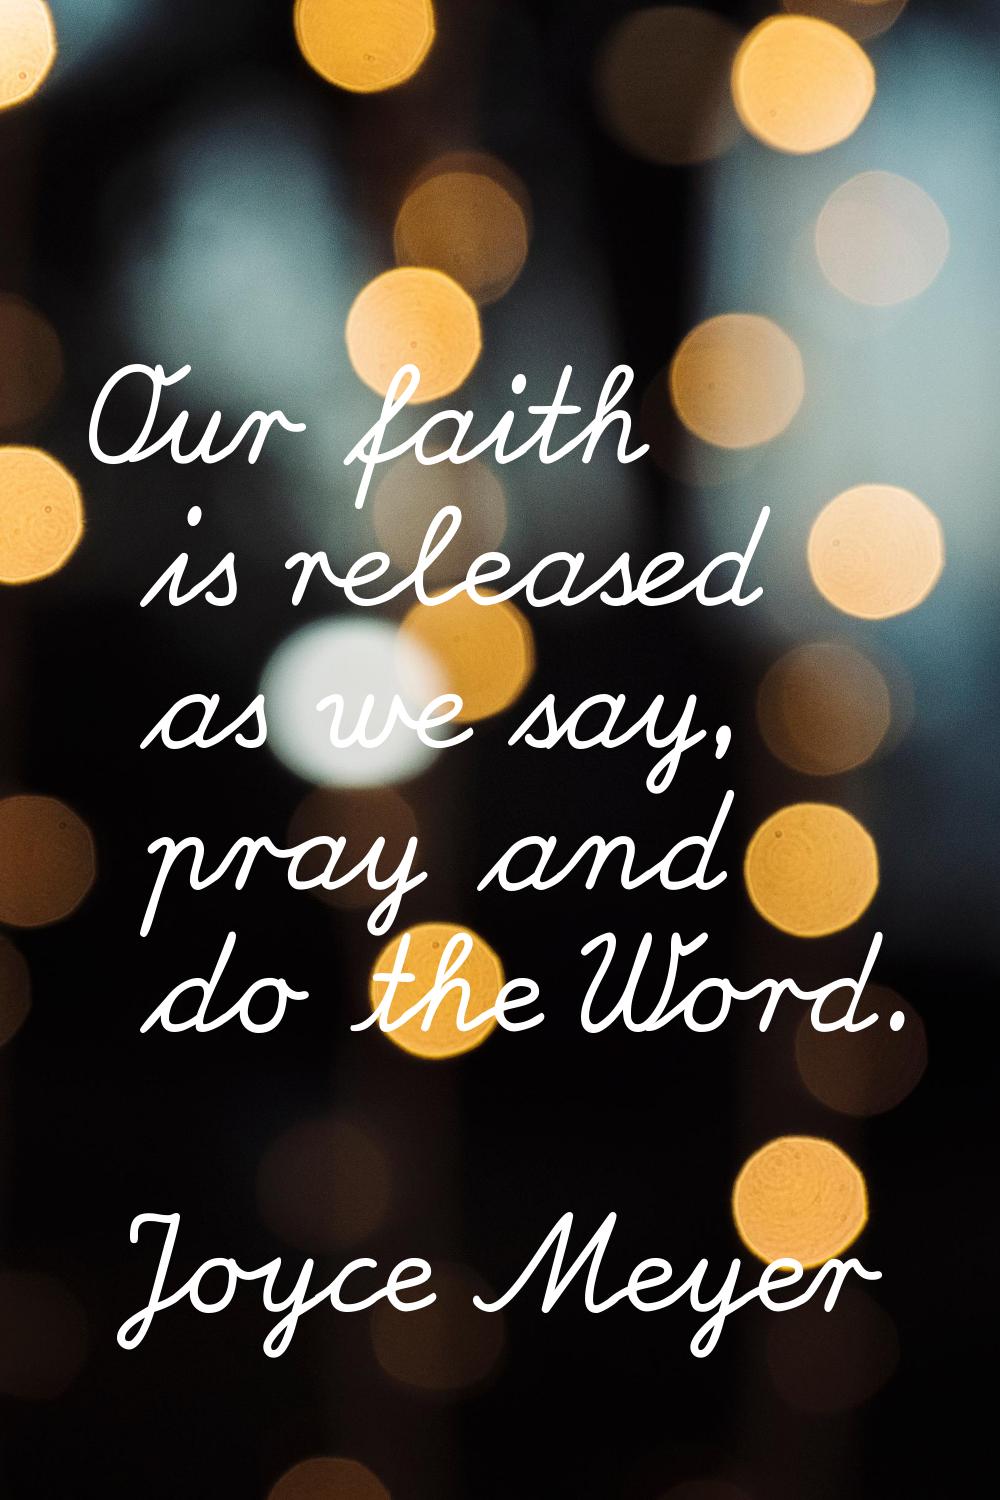 Our faith is released as we say, pray and do the Word.